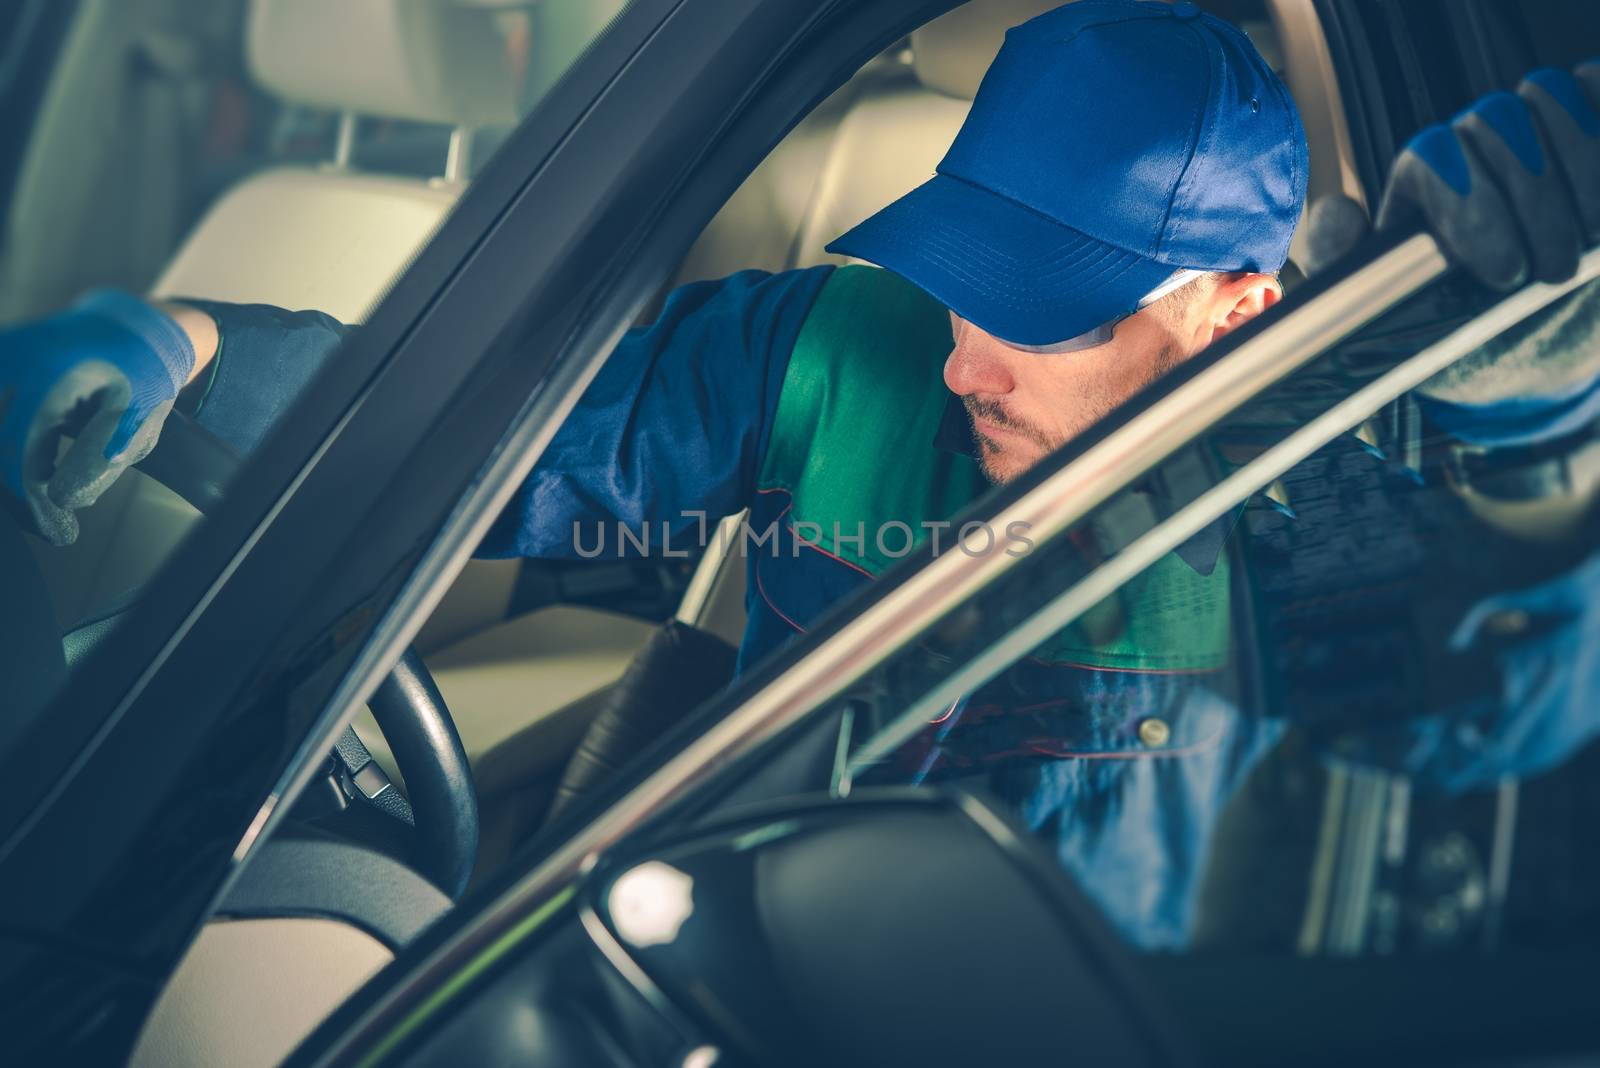 Car Mechanic Fixing Vehicle While Seating Inside the Car. Professional Car Maintenance.